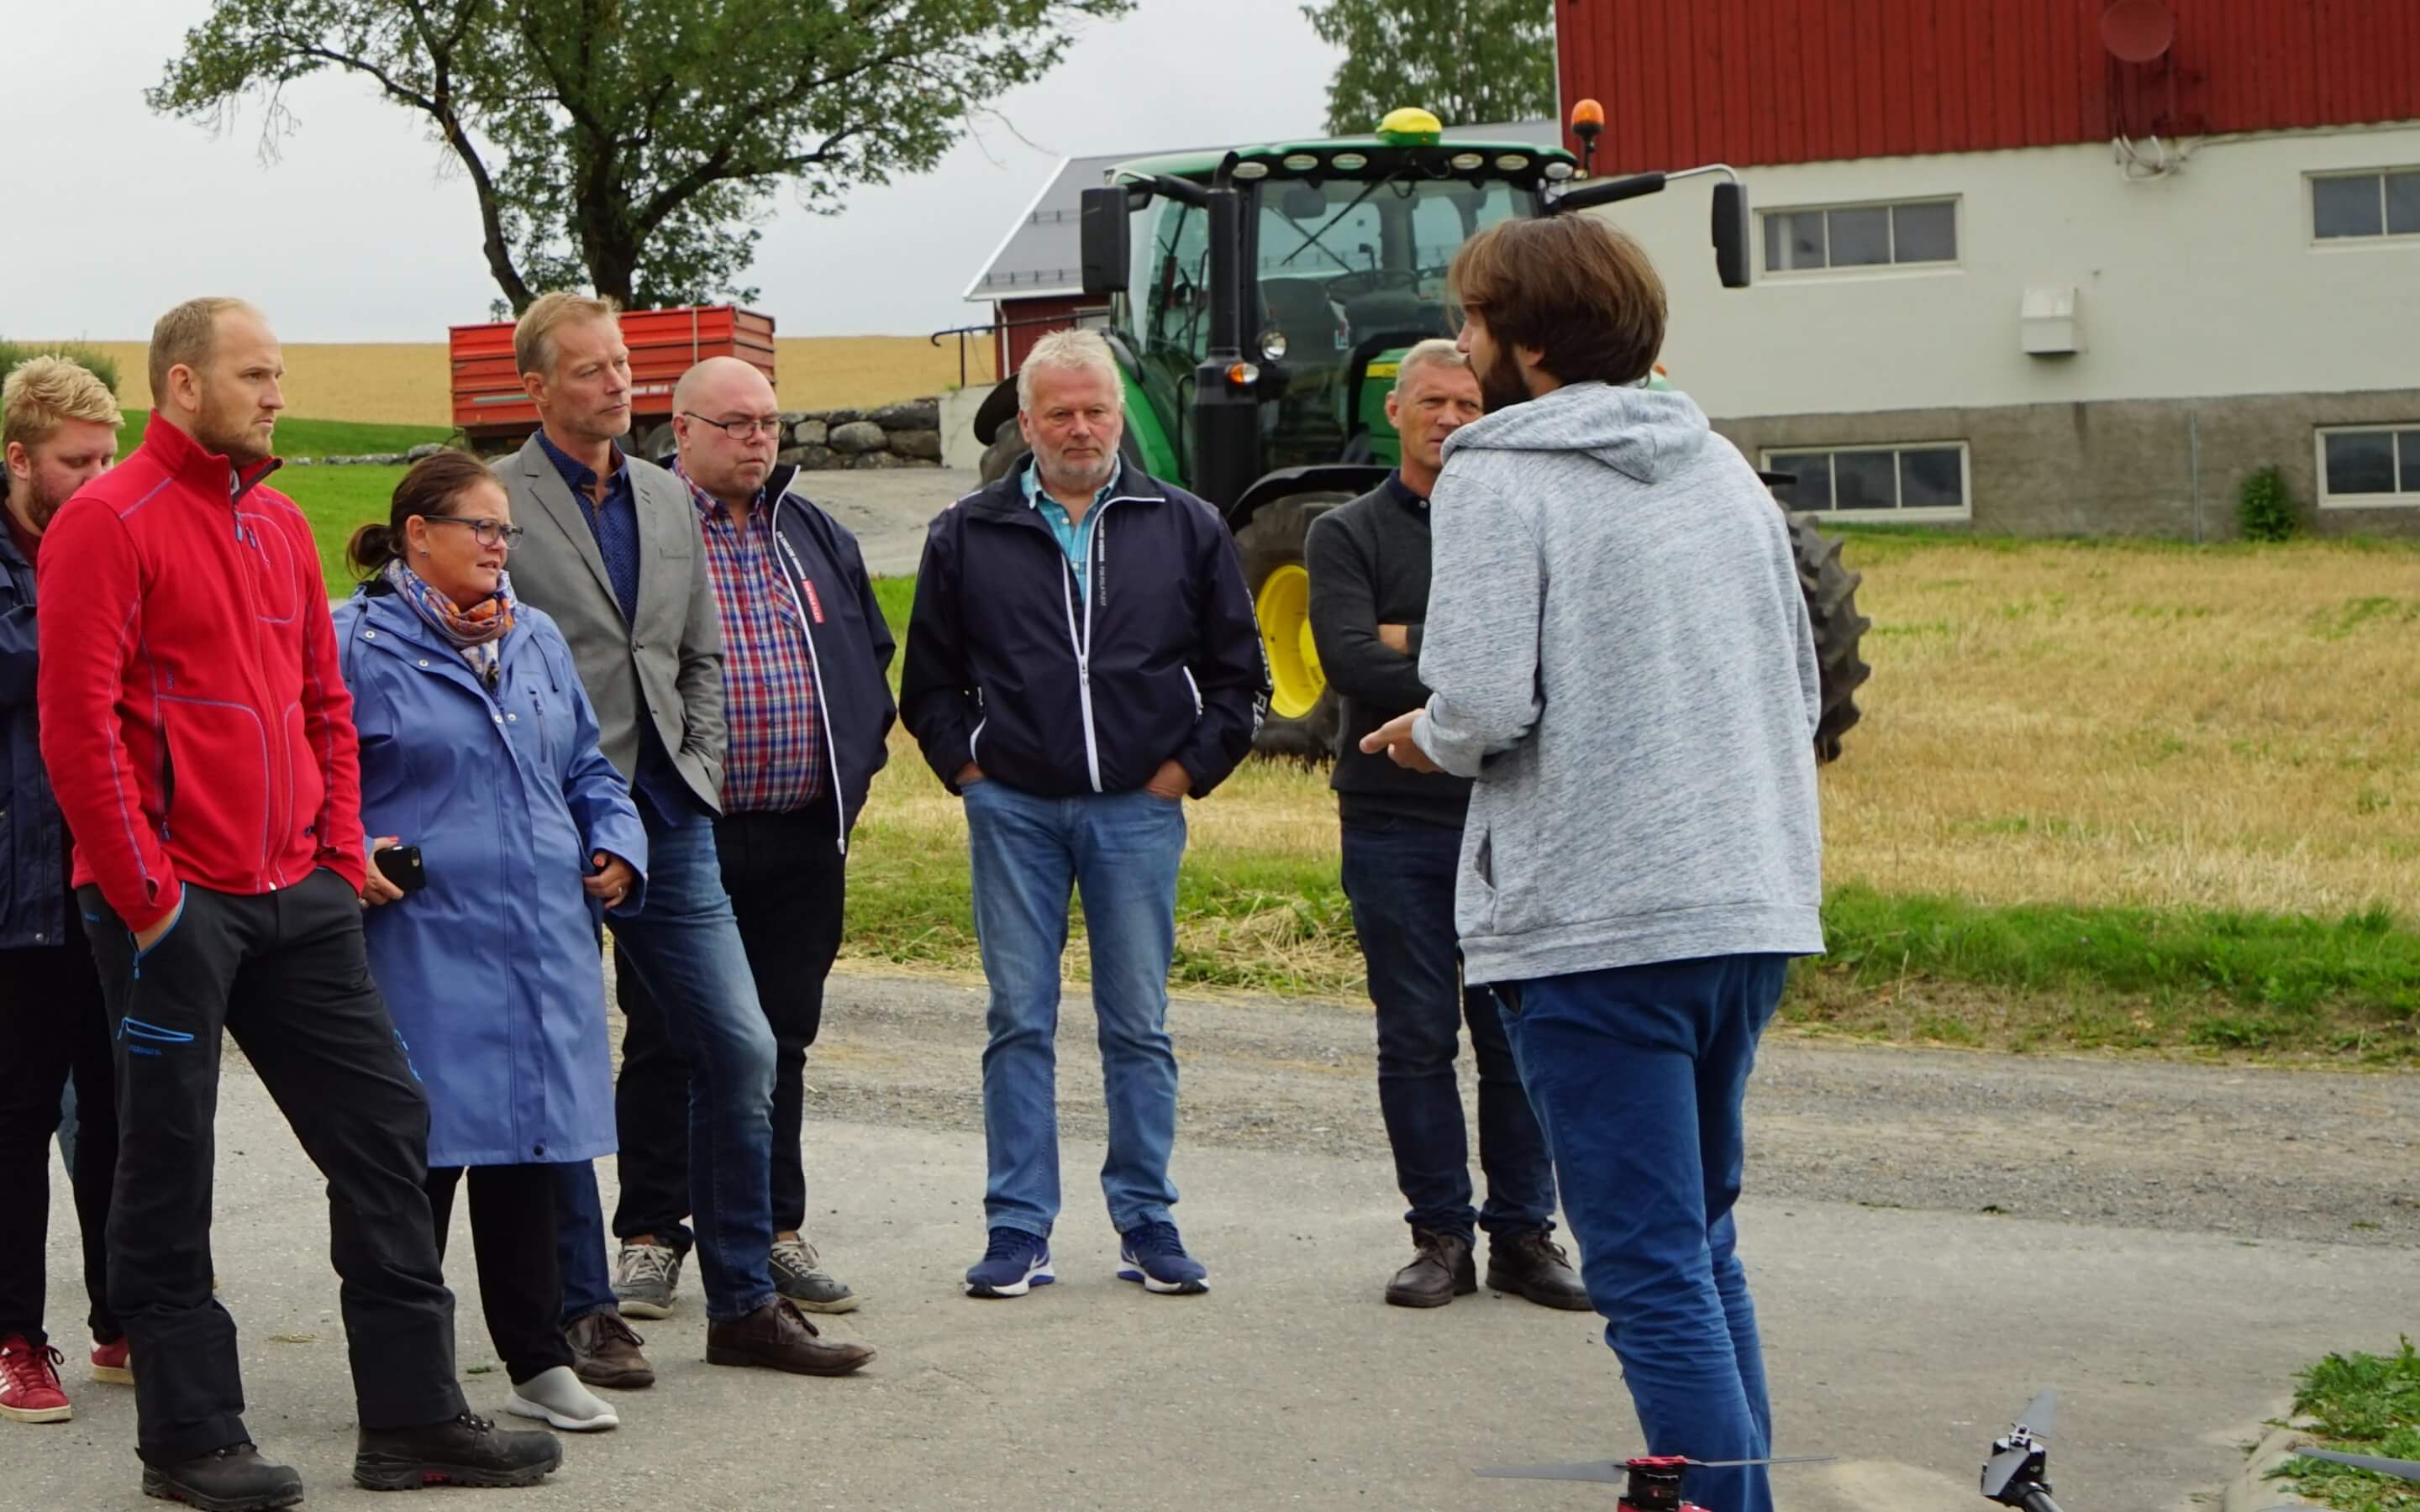 The Minister of Food and Agriculture visit to NIBIO Apelsvoll